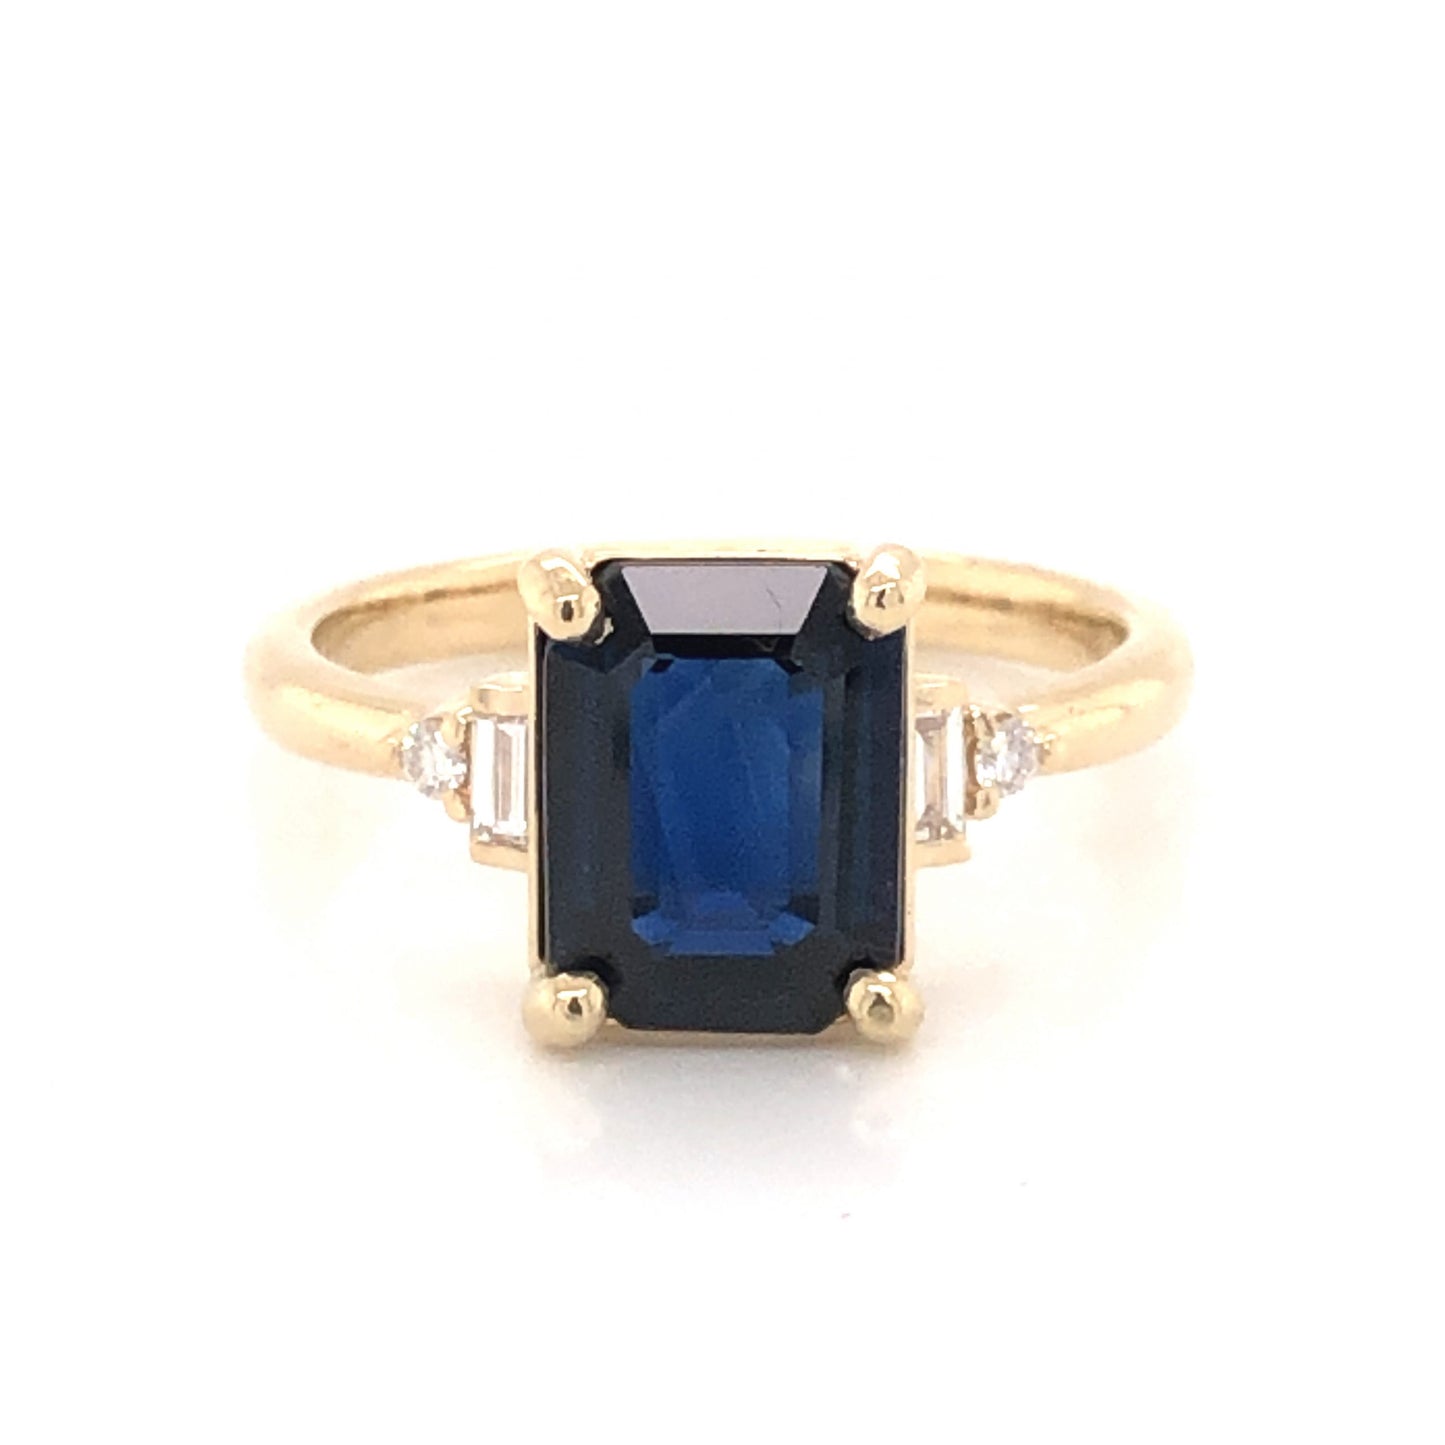 2.67 Emerald Cut Sapphire Engagement Ring in Yellow Gold